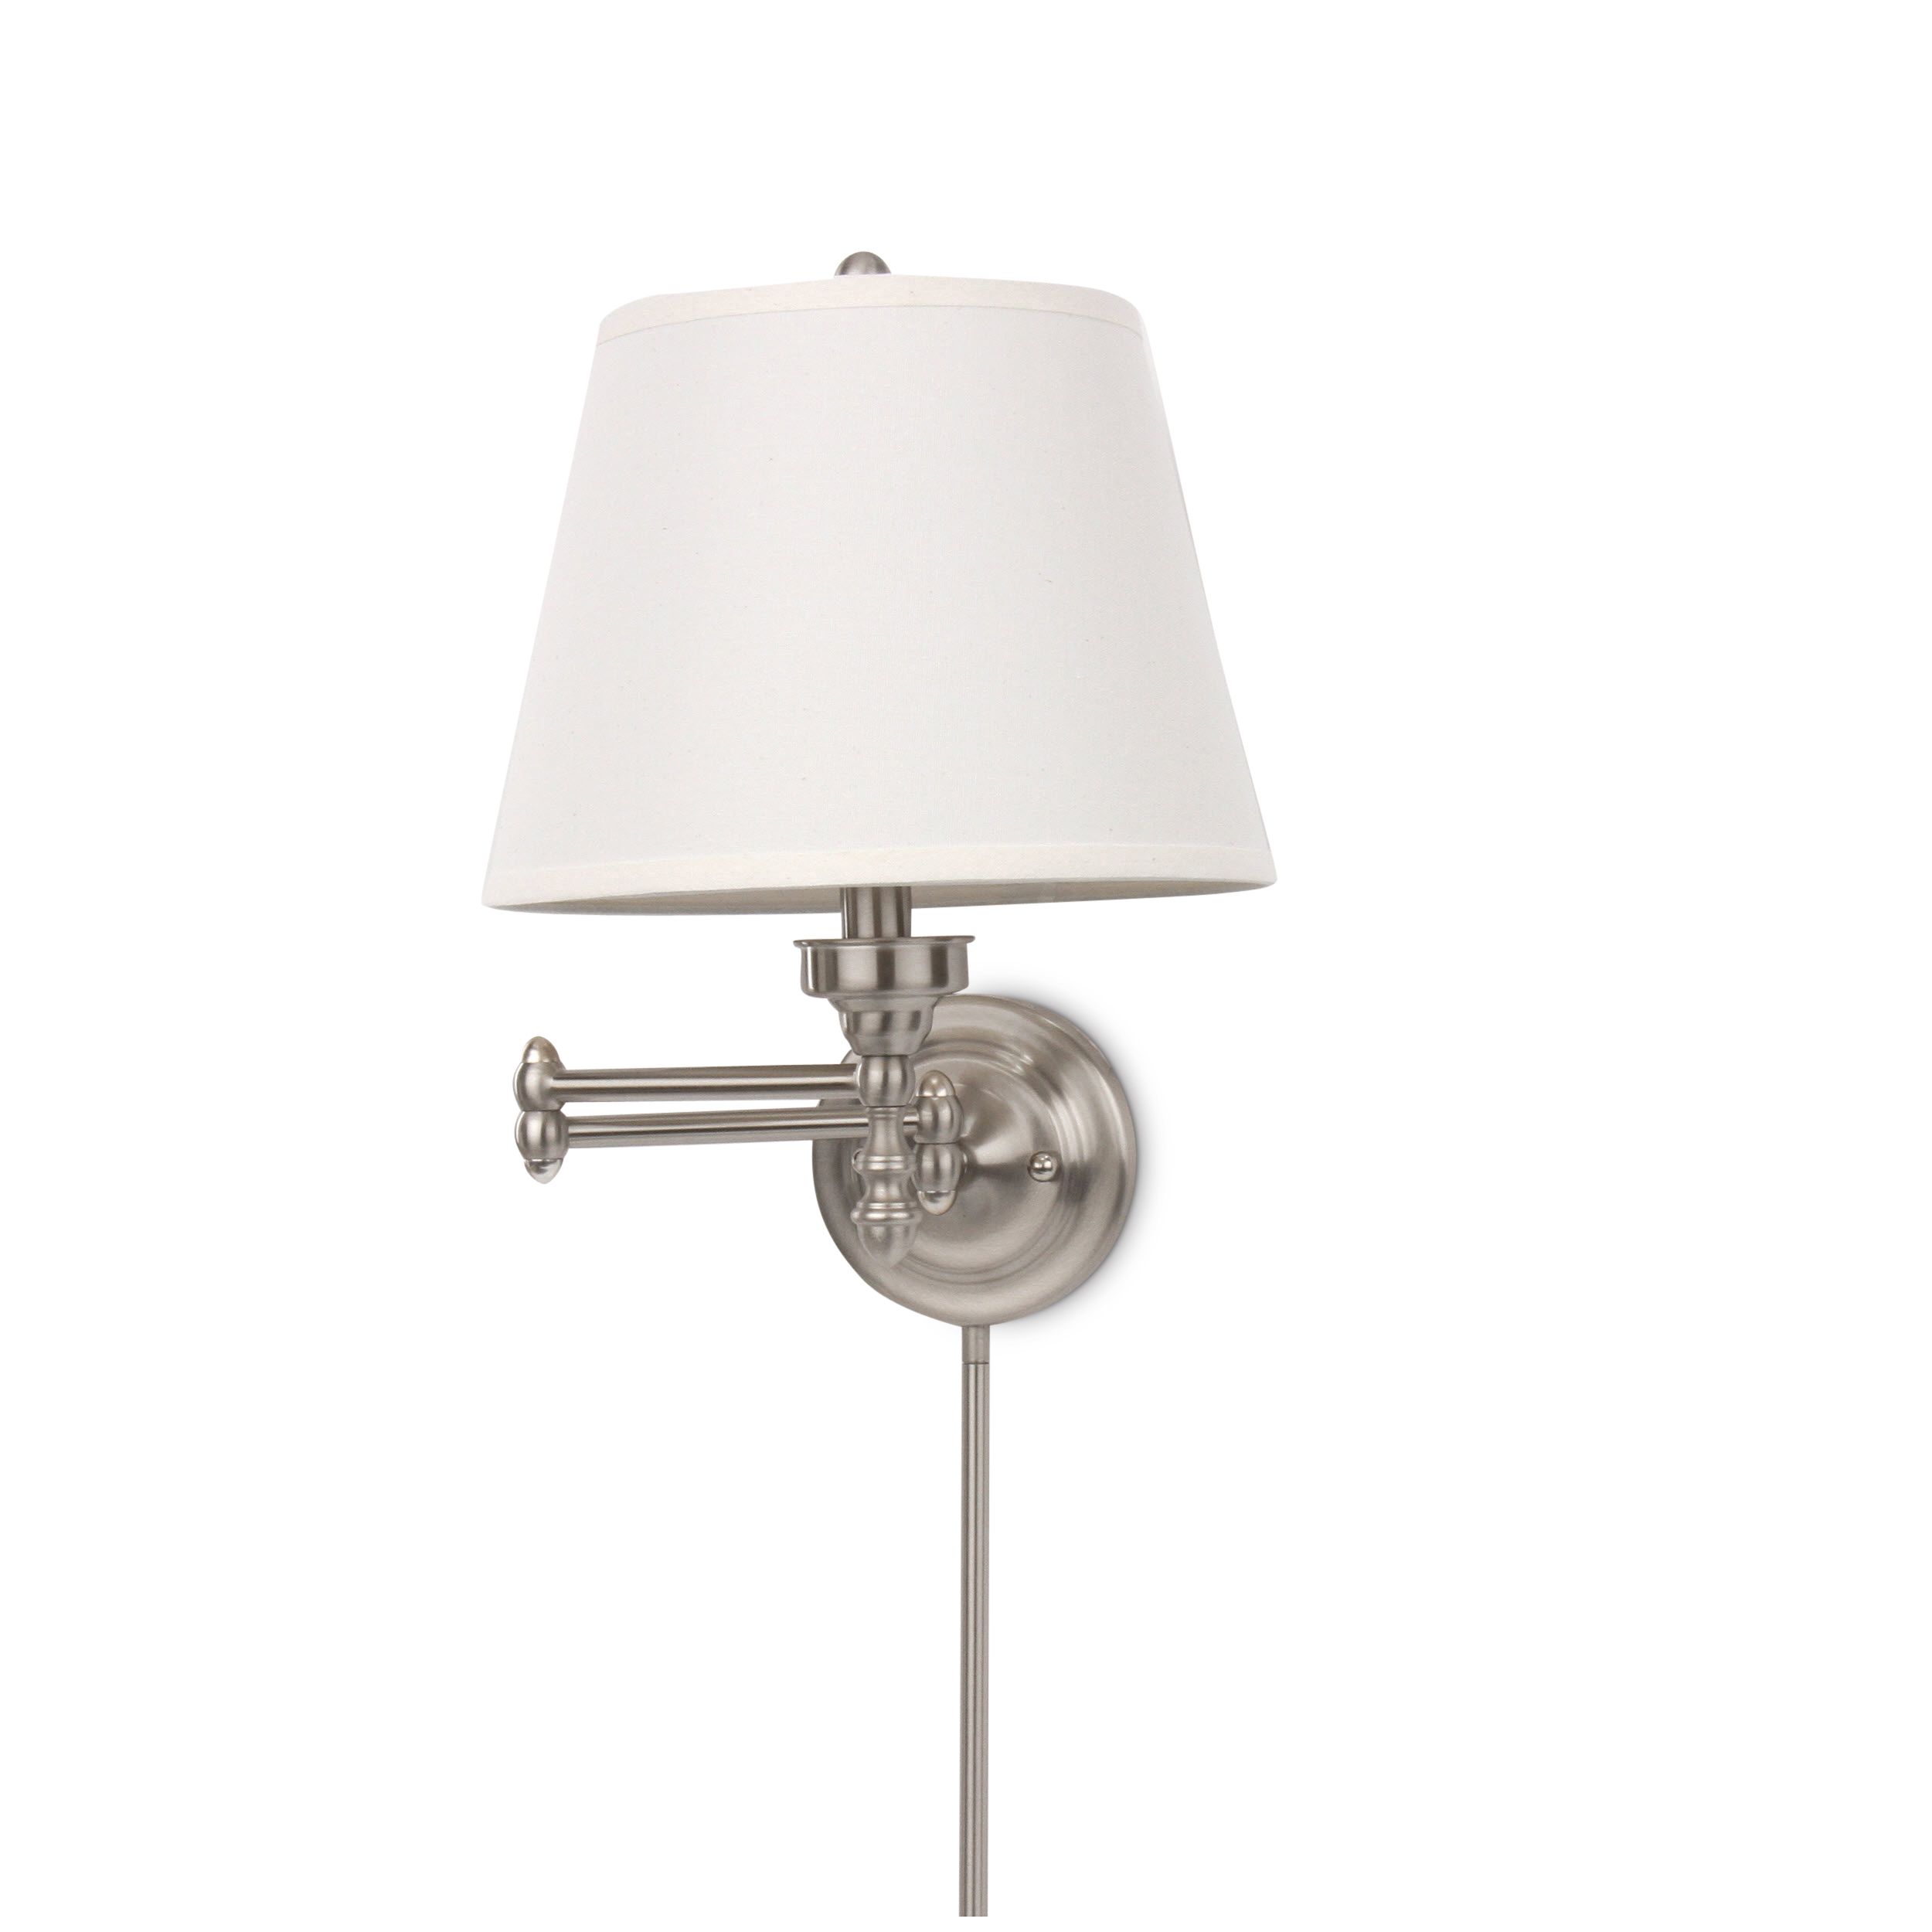 Details about   Hampton Bay 1-Light Brushed Nickel Swing Arm Sconce with White Fabric Shade 